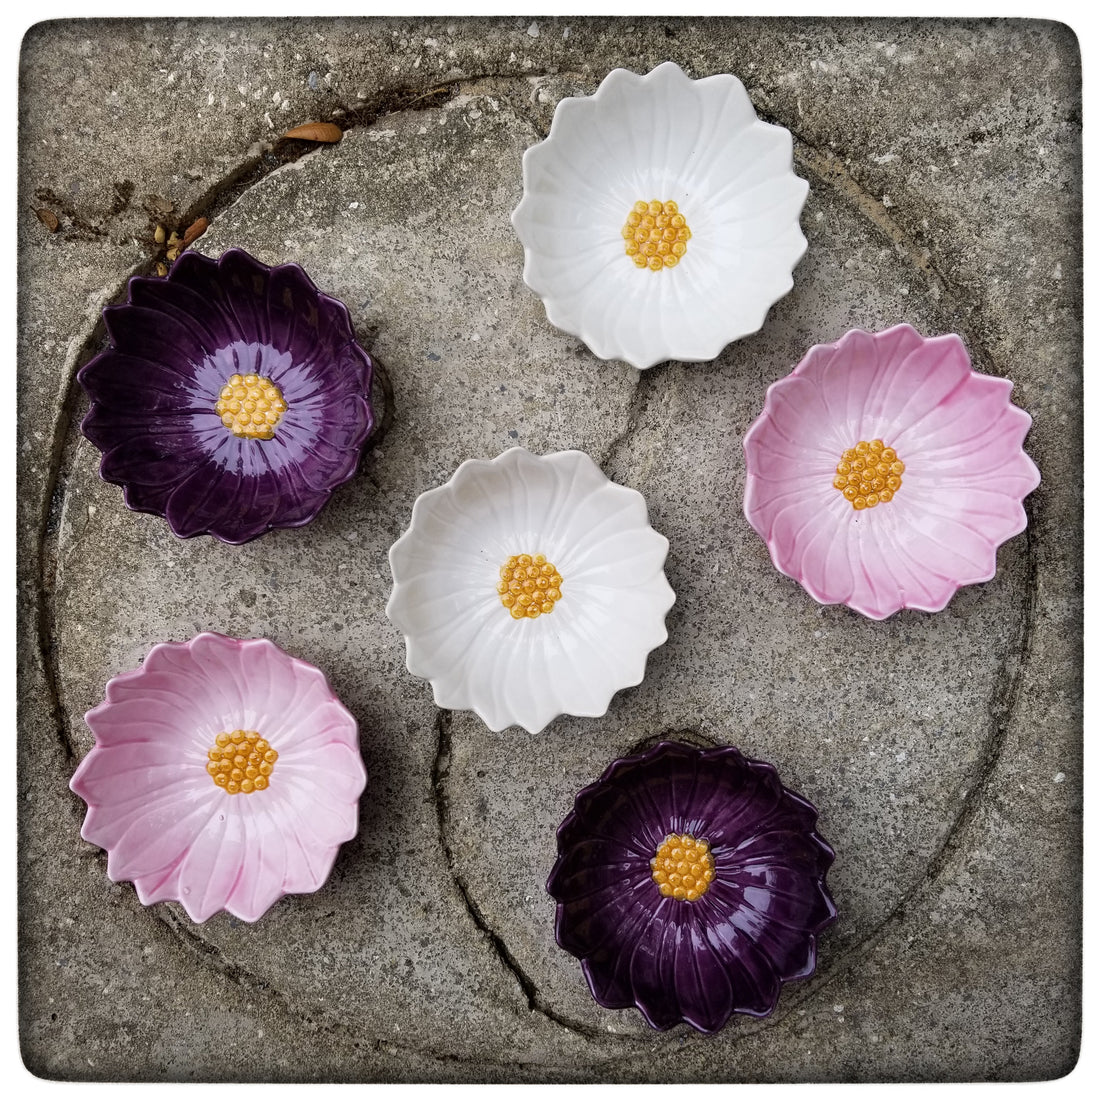 New in the shop: Daisy bowls